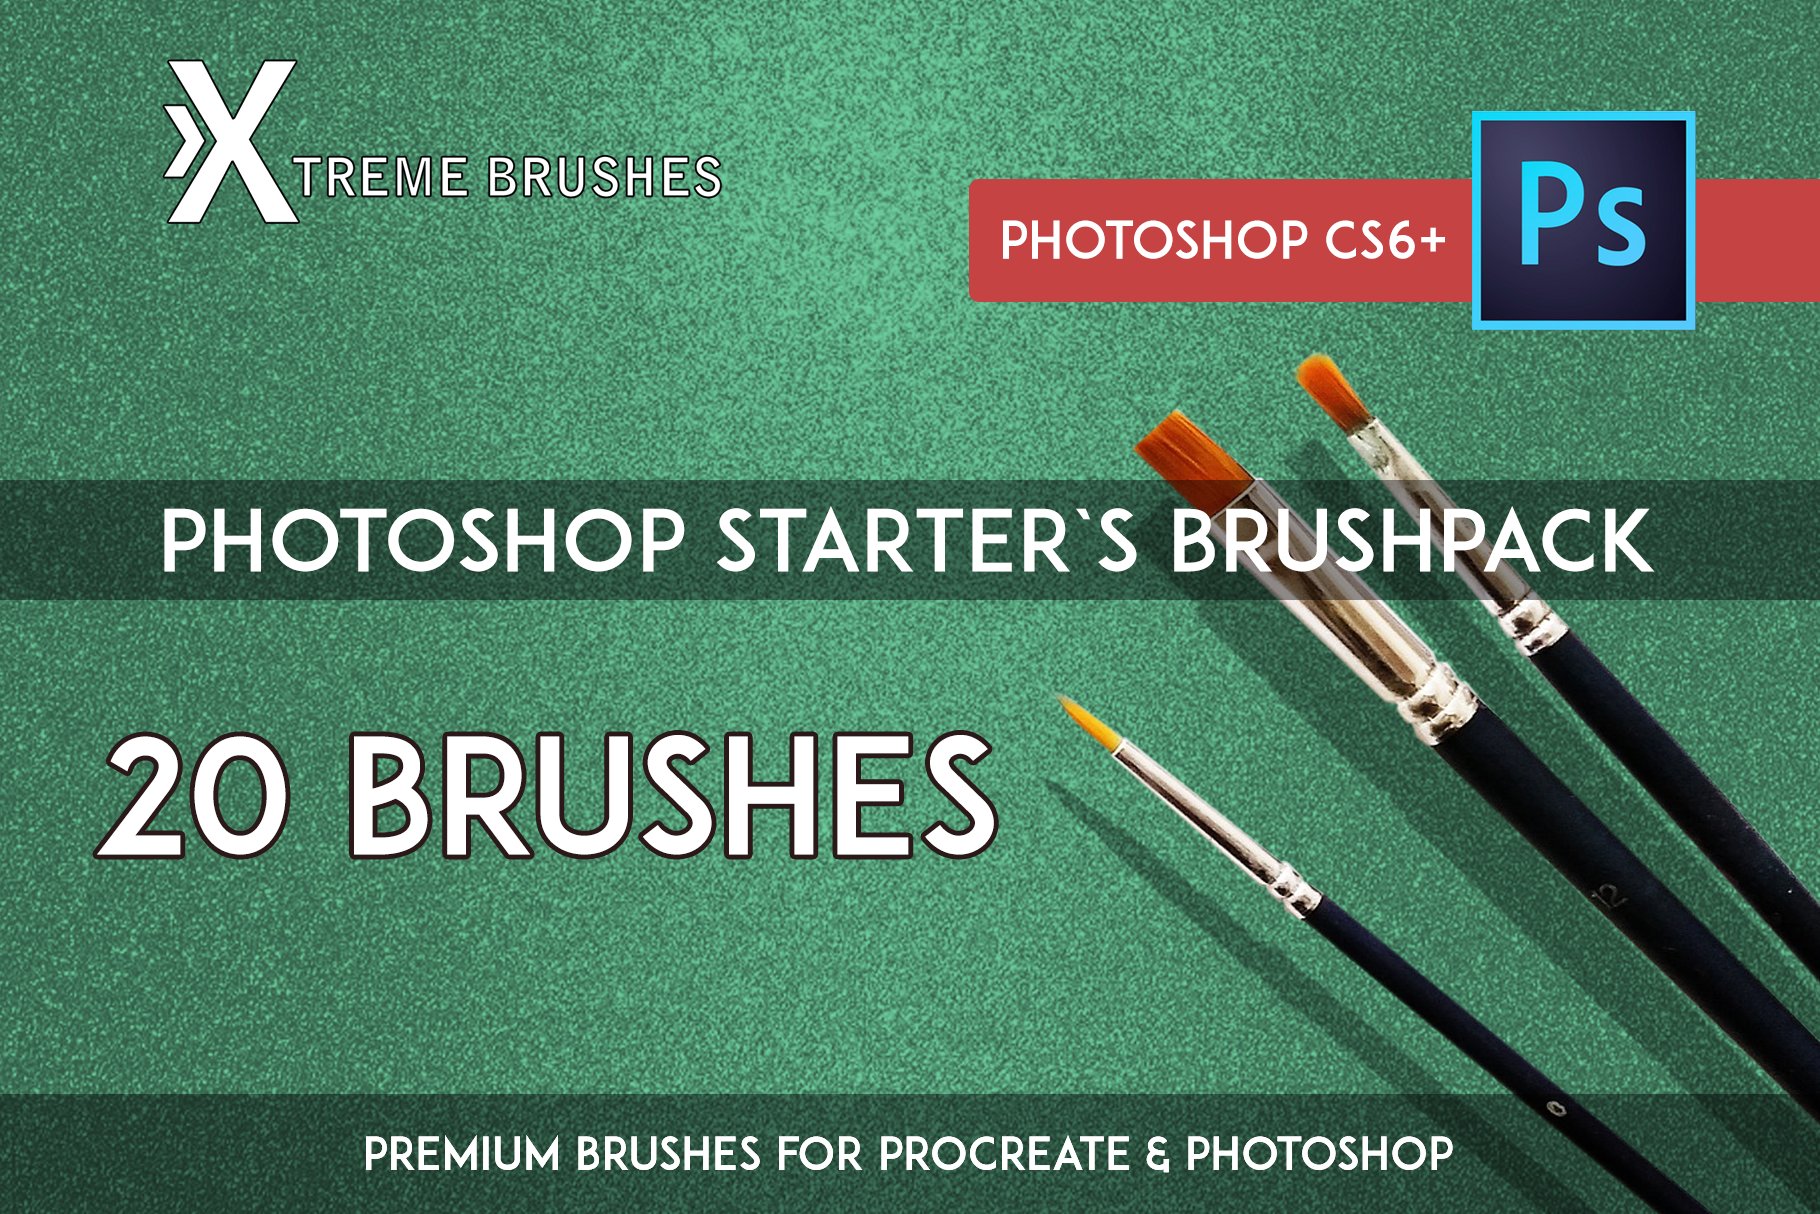 Photoshop Starters Brush Packcover image.